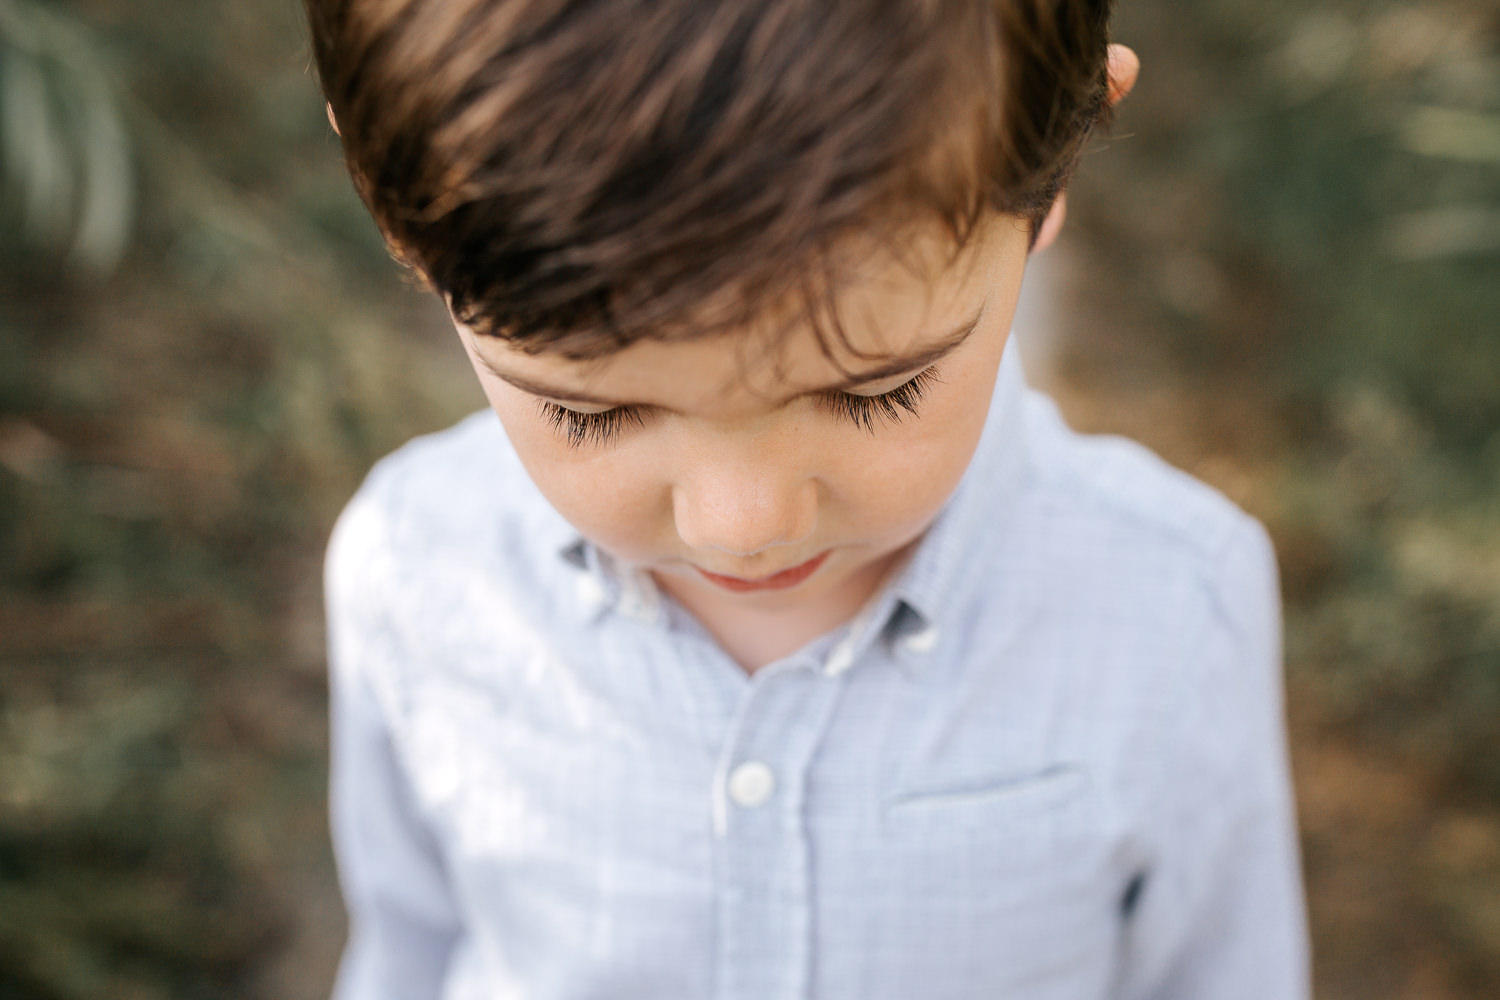 4 year old boy with dark hair and eyes wearing button down shirt standing on path looking down, close up of long eyelashes - Barrie In-Home Photos